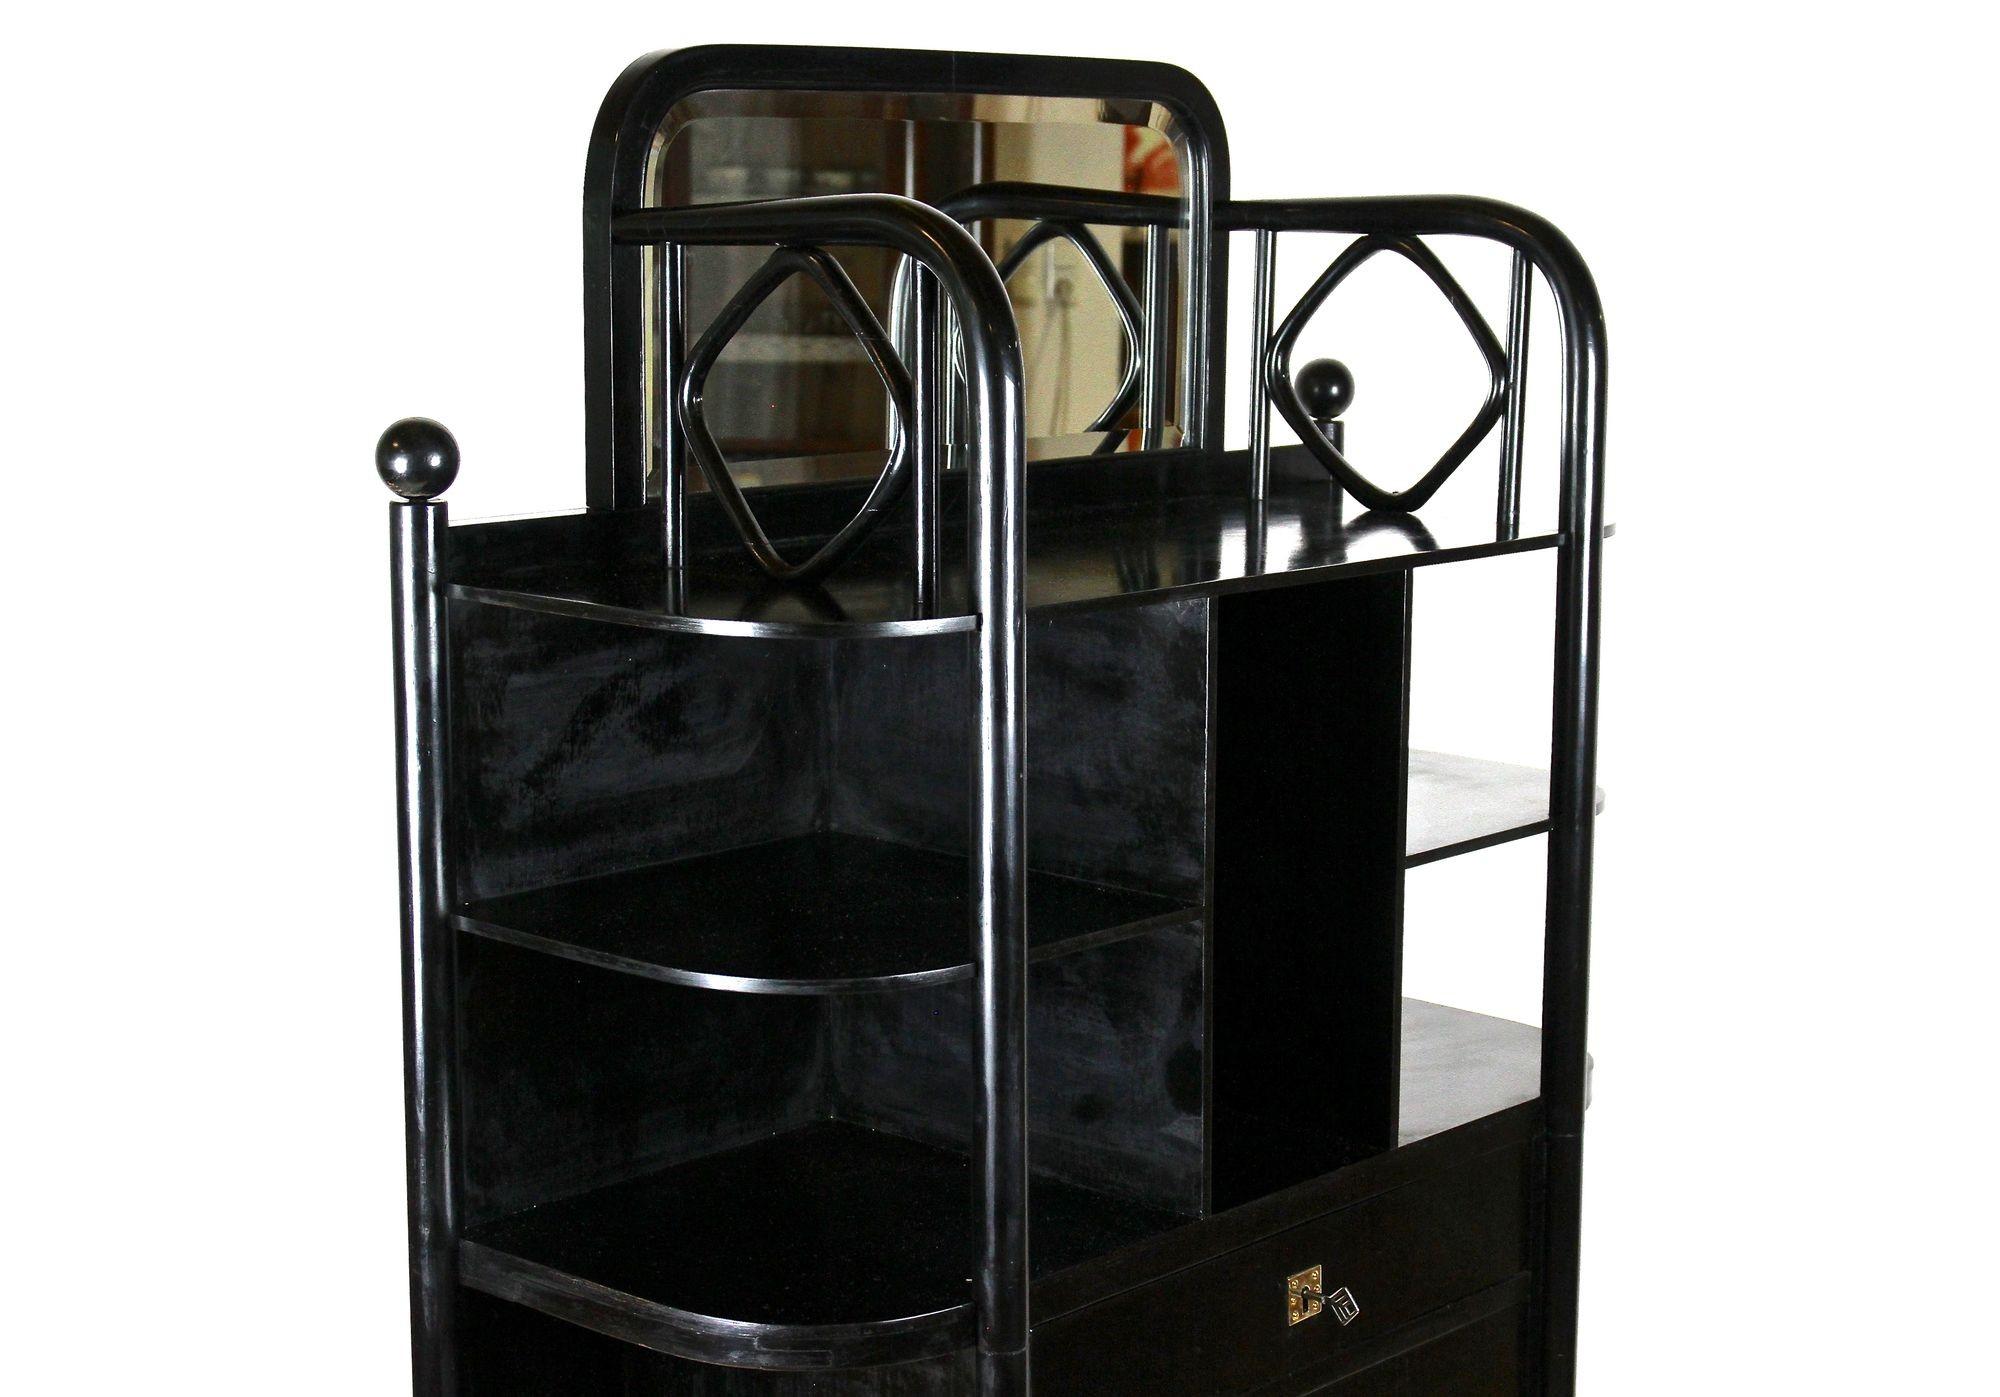 Black Art Nouveau Display Cabinet by Josef Hoffmann for Thonet, AT ca. 1905 For Sale 11